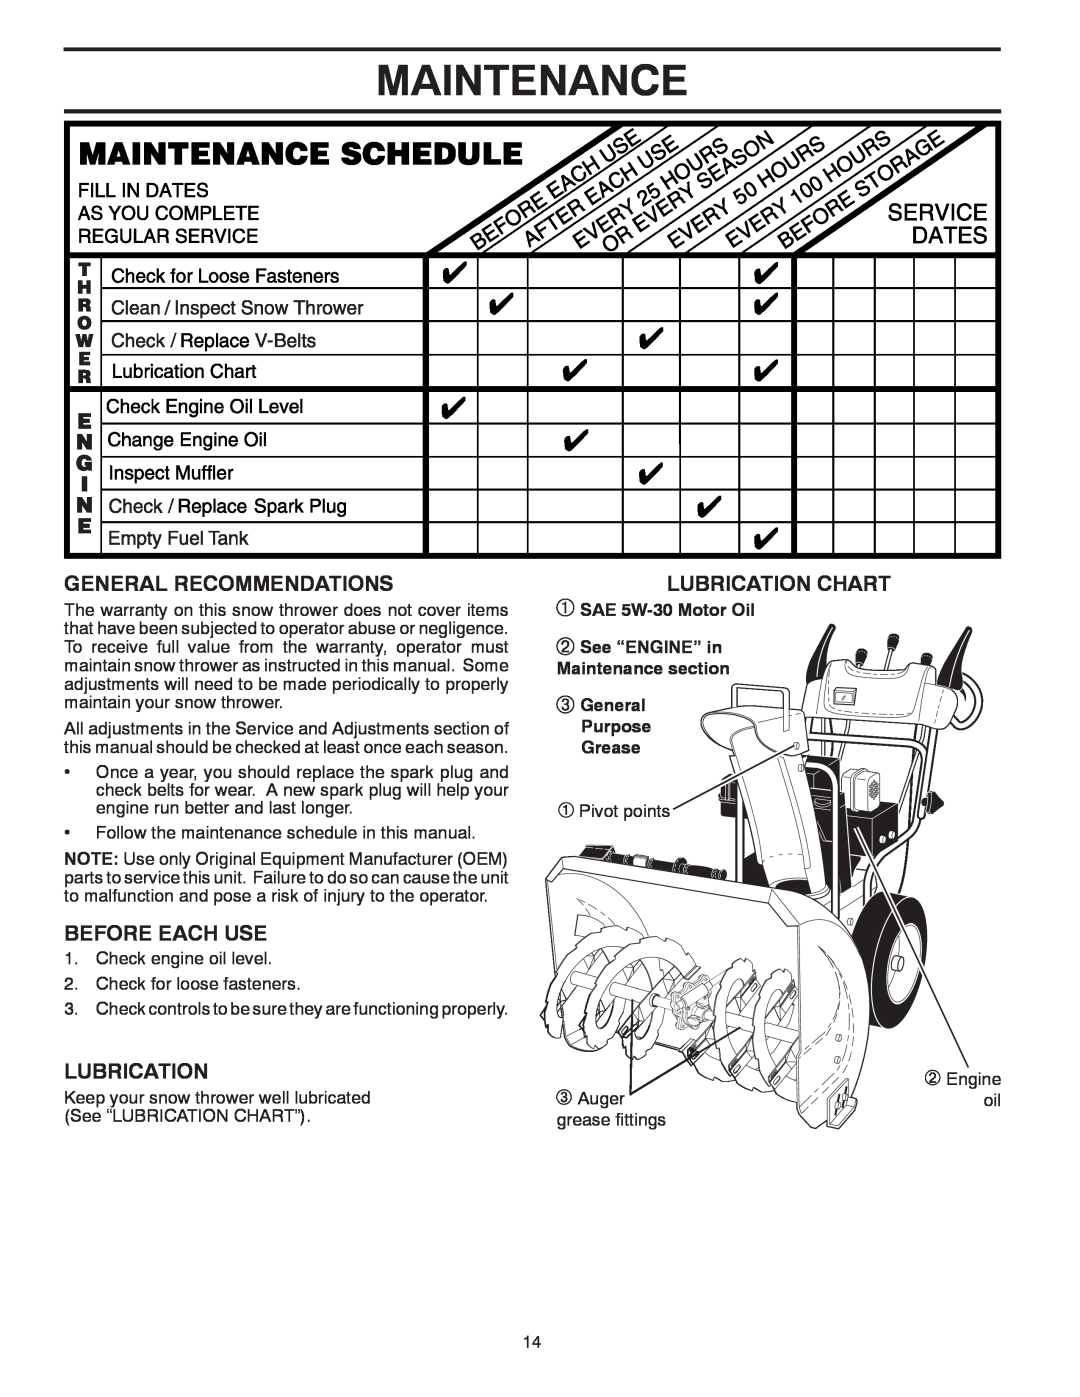 Poulan 429924, 96192003101 owner manual Maintenance, General Recommendations, Before Each Use, Lubrication Chart 